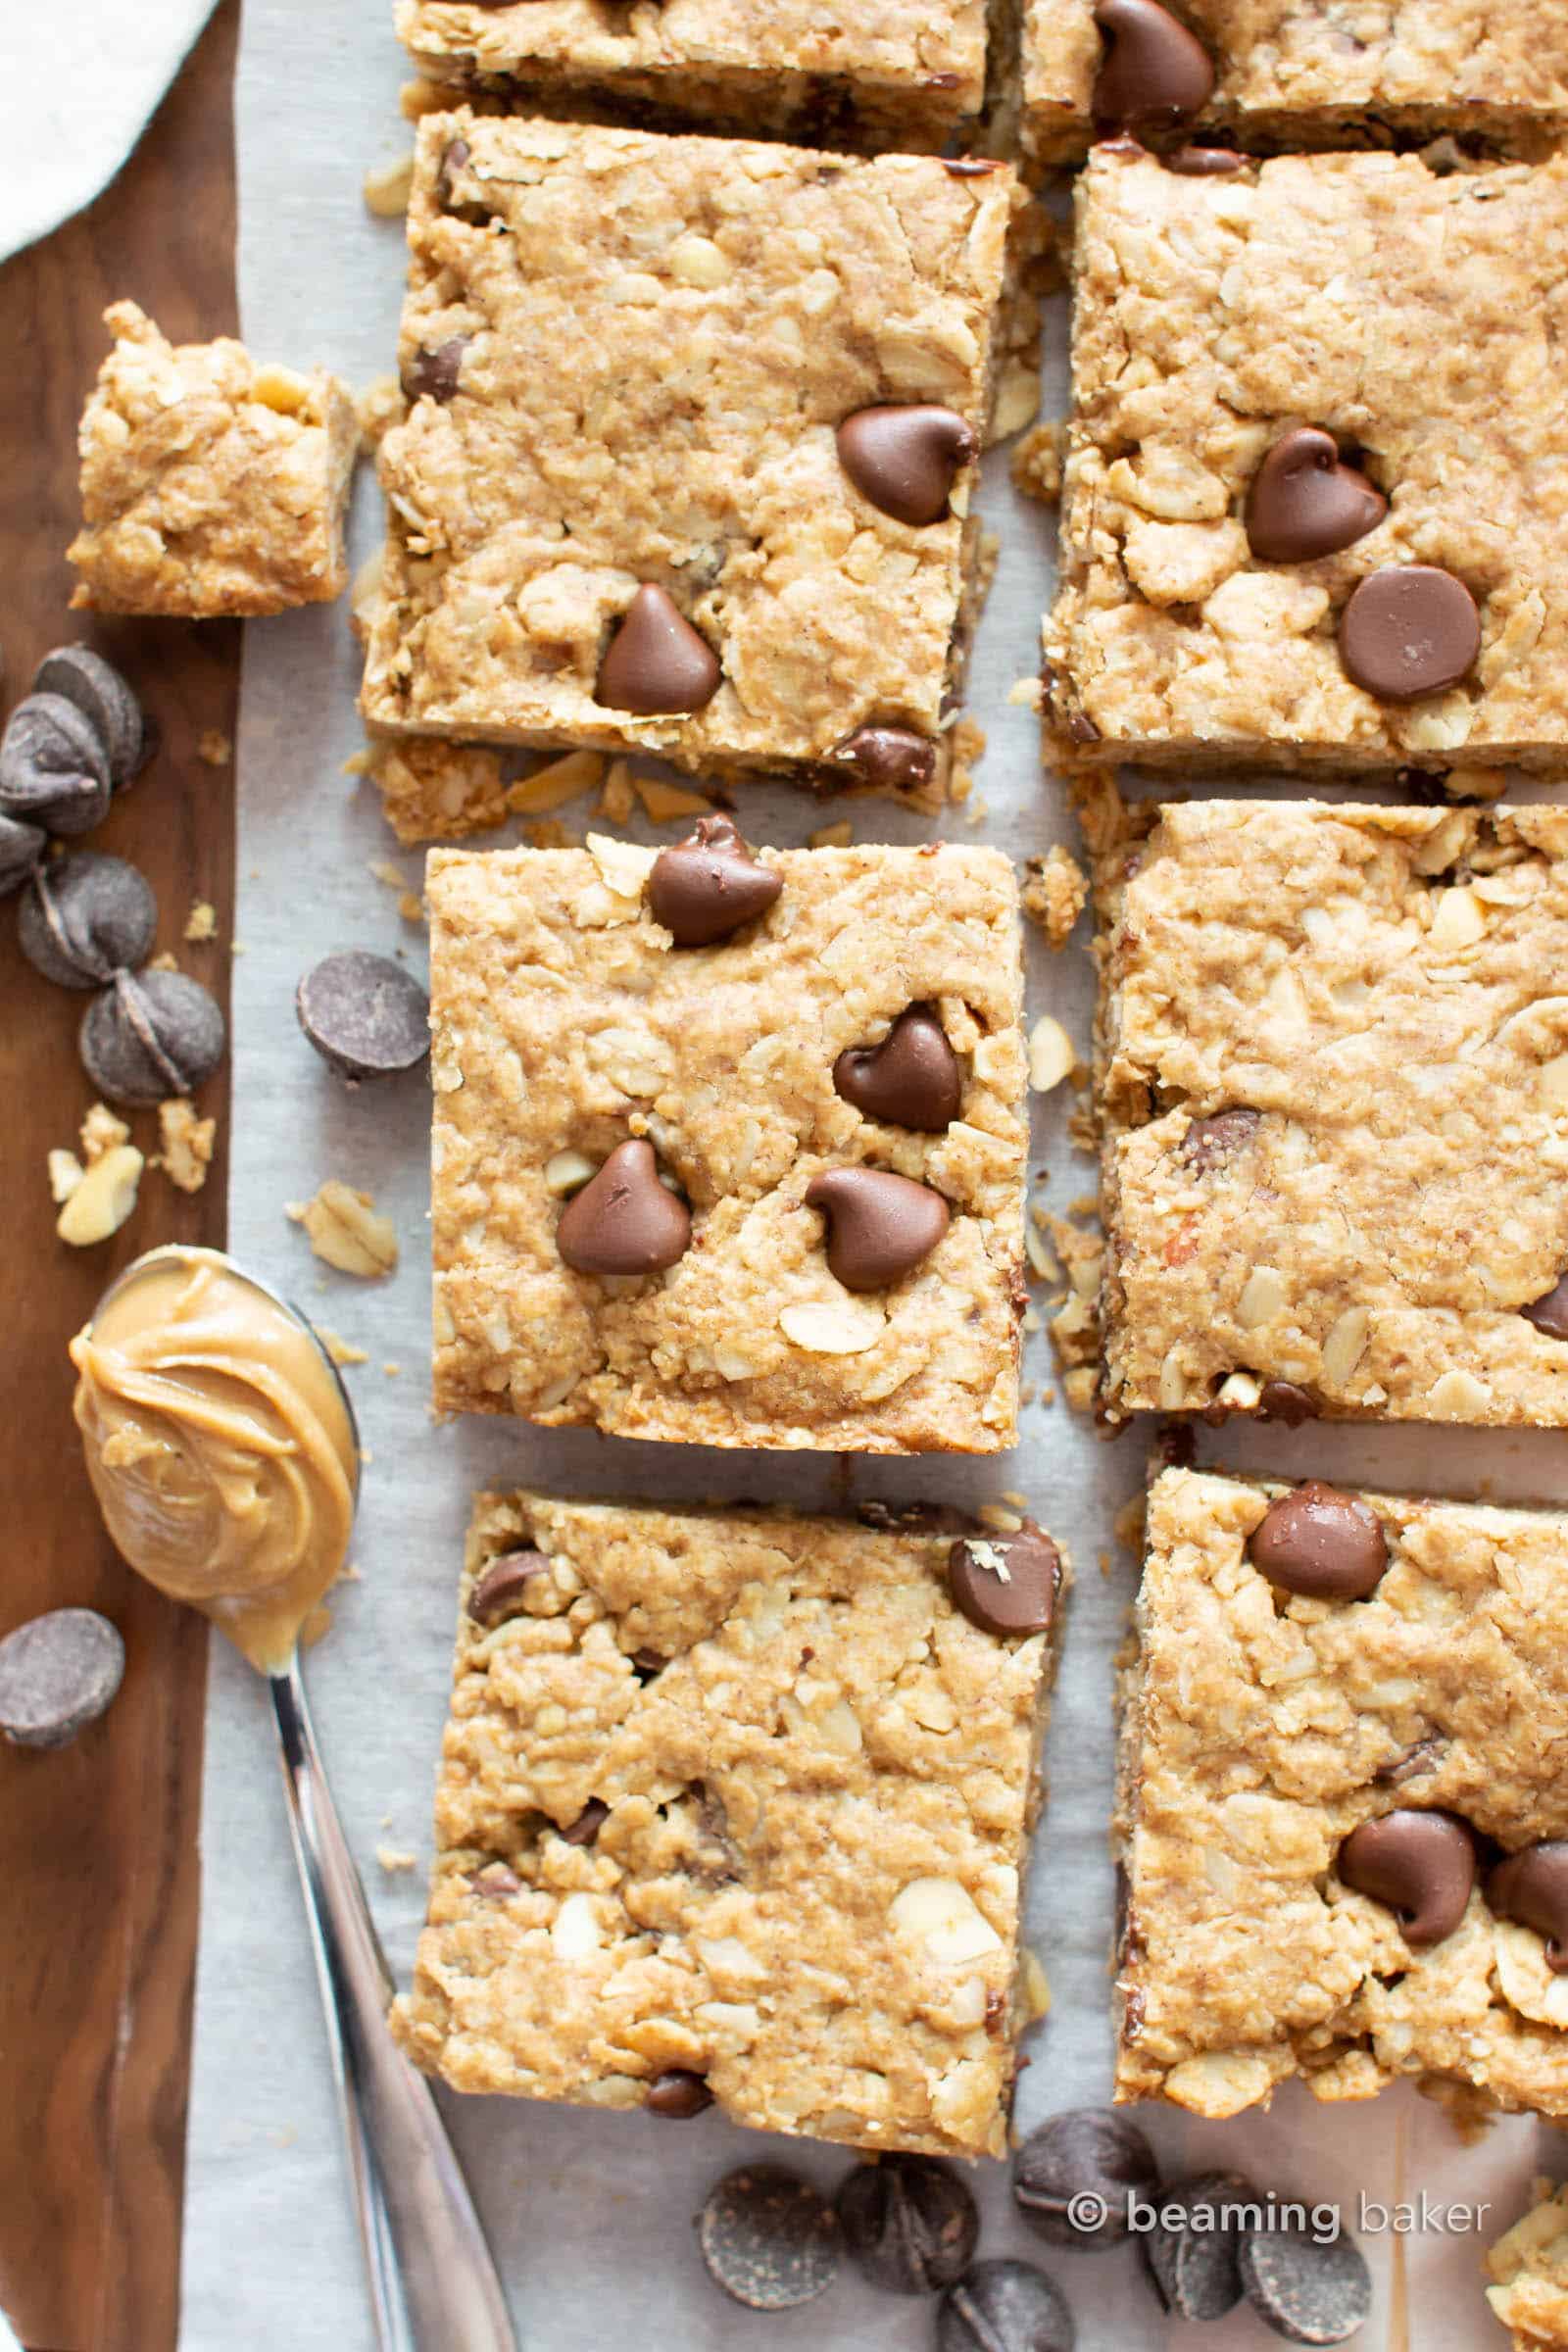 Peanut Butter Chocolate Chip Oatmeal Cookie Bars: this healthy oatmeal cookie bars recipe is packed with creamy peanut butter, fiber-rich oats and plant-based ingredients. Chewy & delicious cookies bars! Vegan, Gluten Free, Dairy-Free. #CookieBars #PeanutButter #Oatmeal #GlutenFree #Vegan | Recipe at BeamingBaker.com